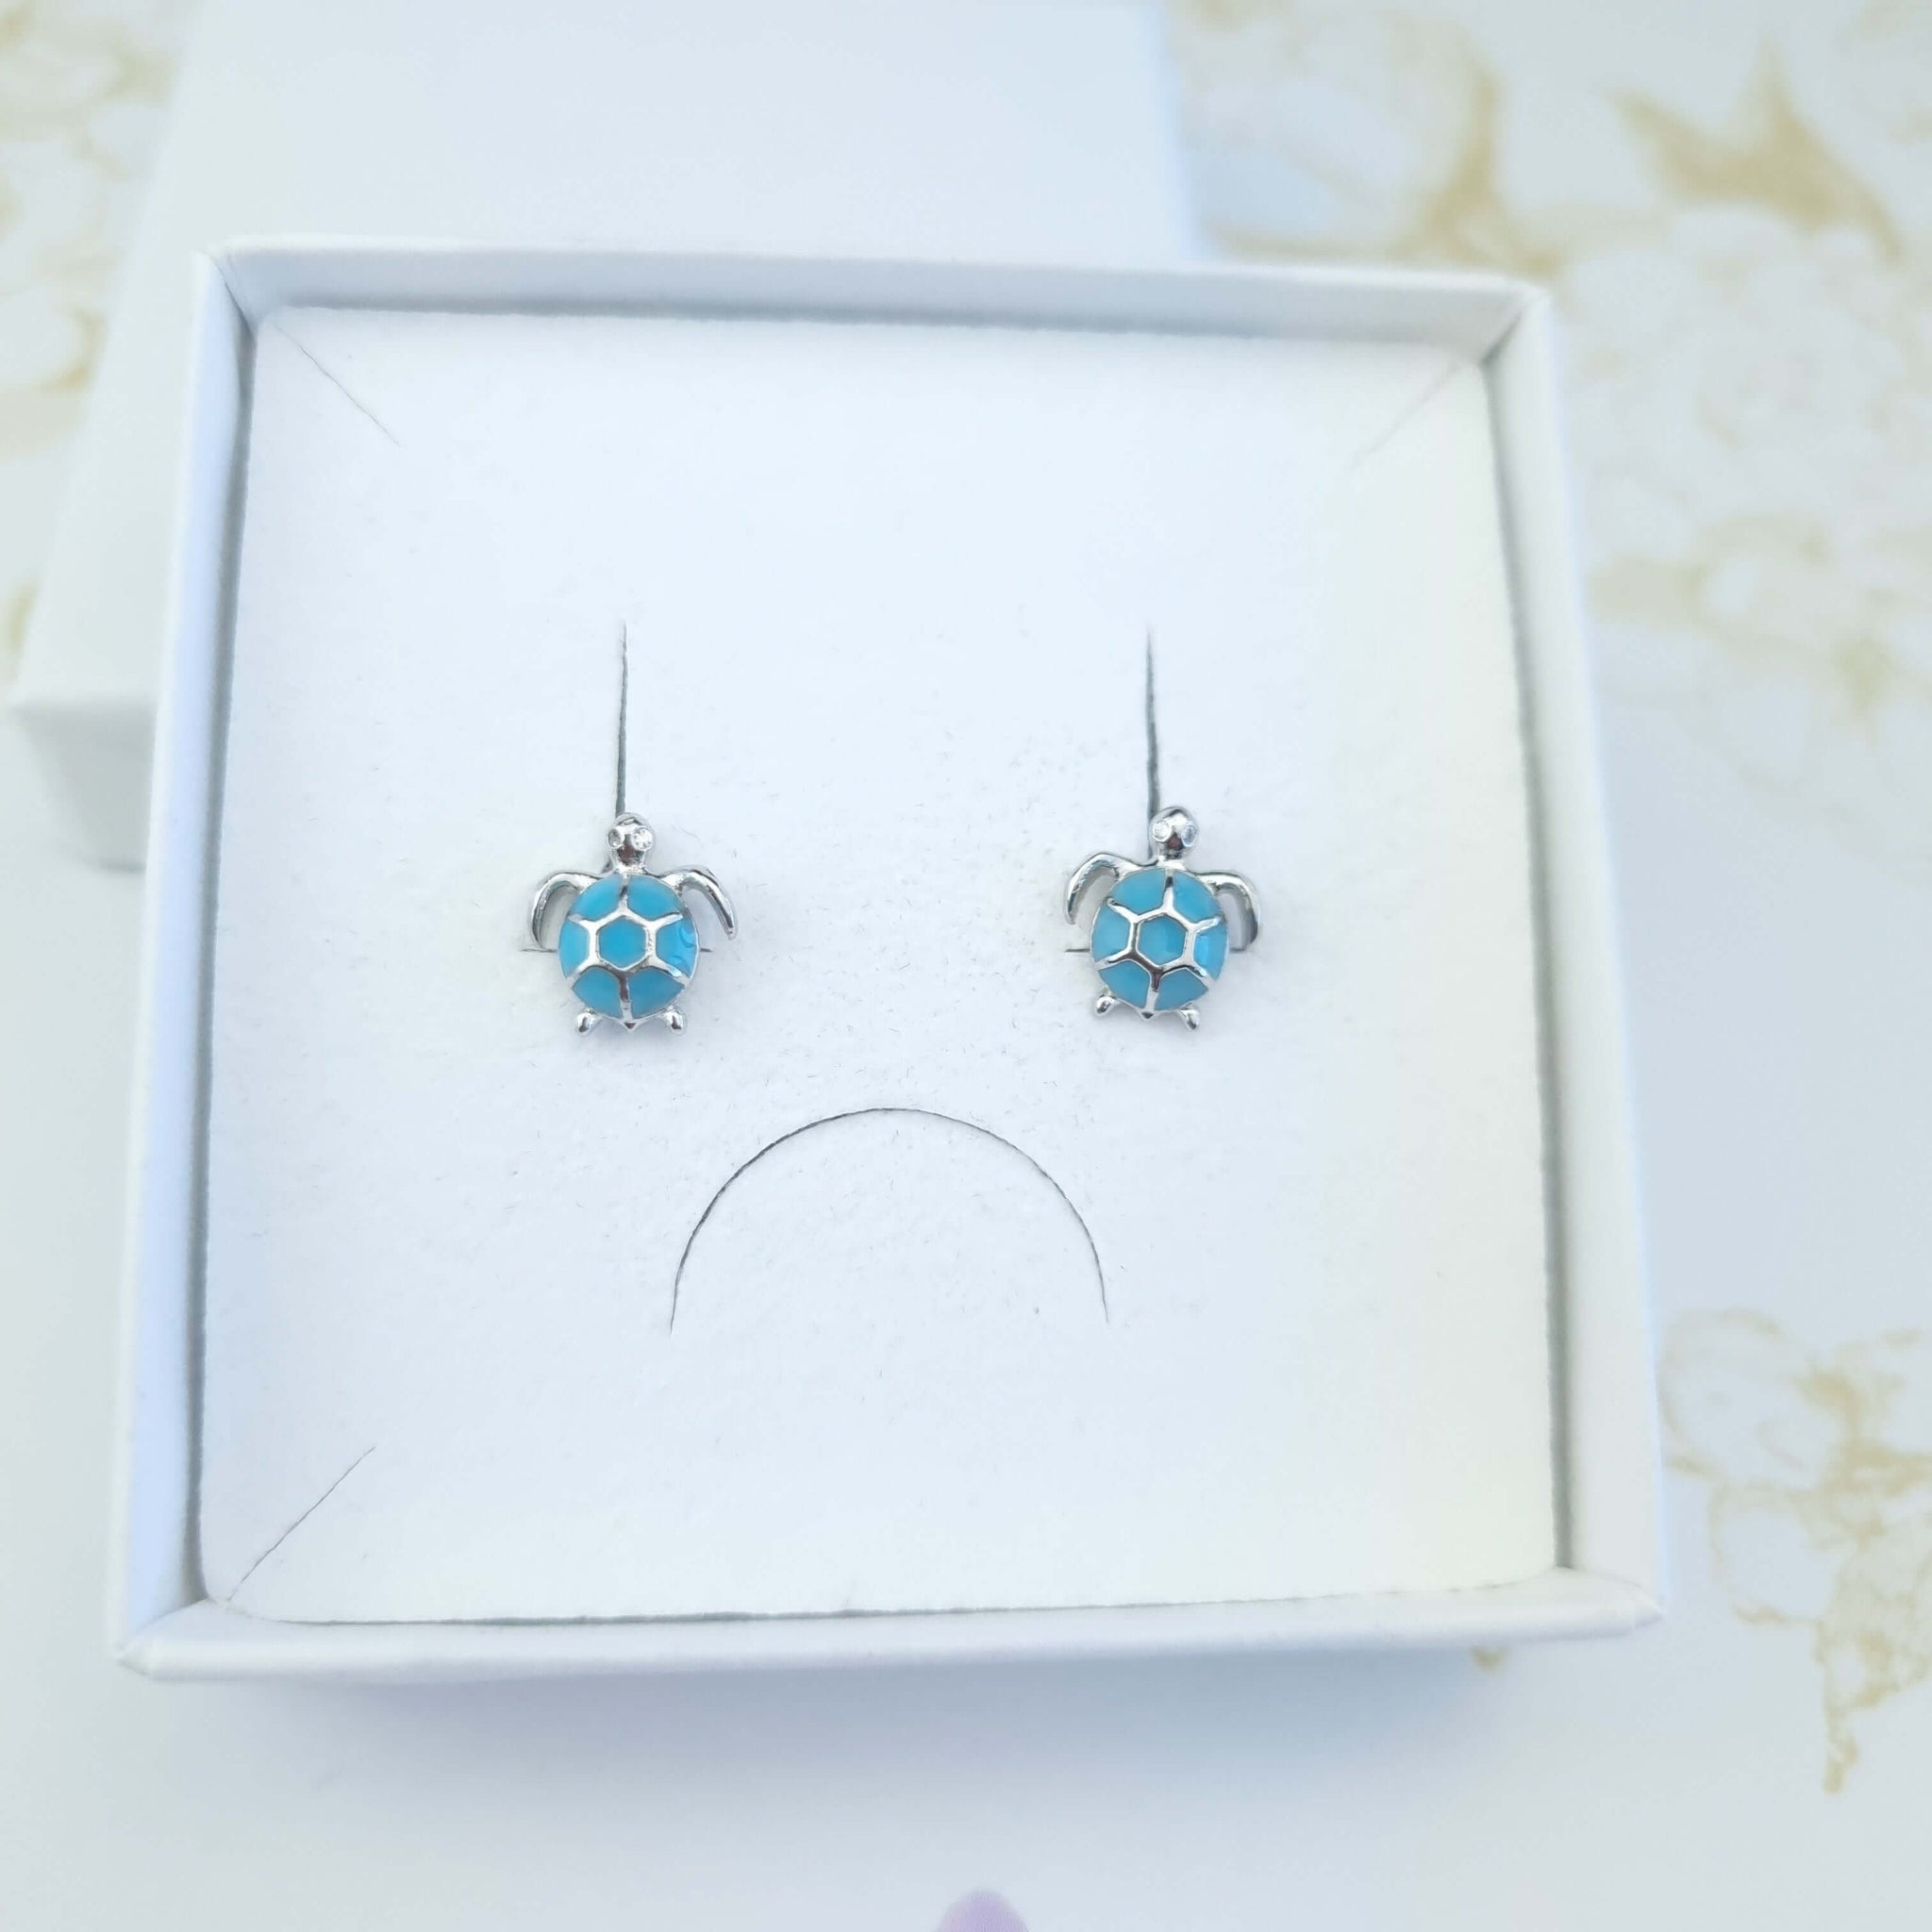 Turtle stud earrings in silver and blue